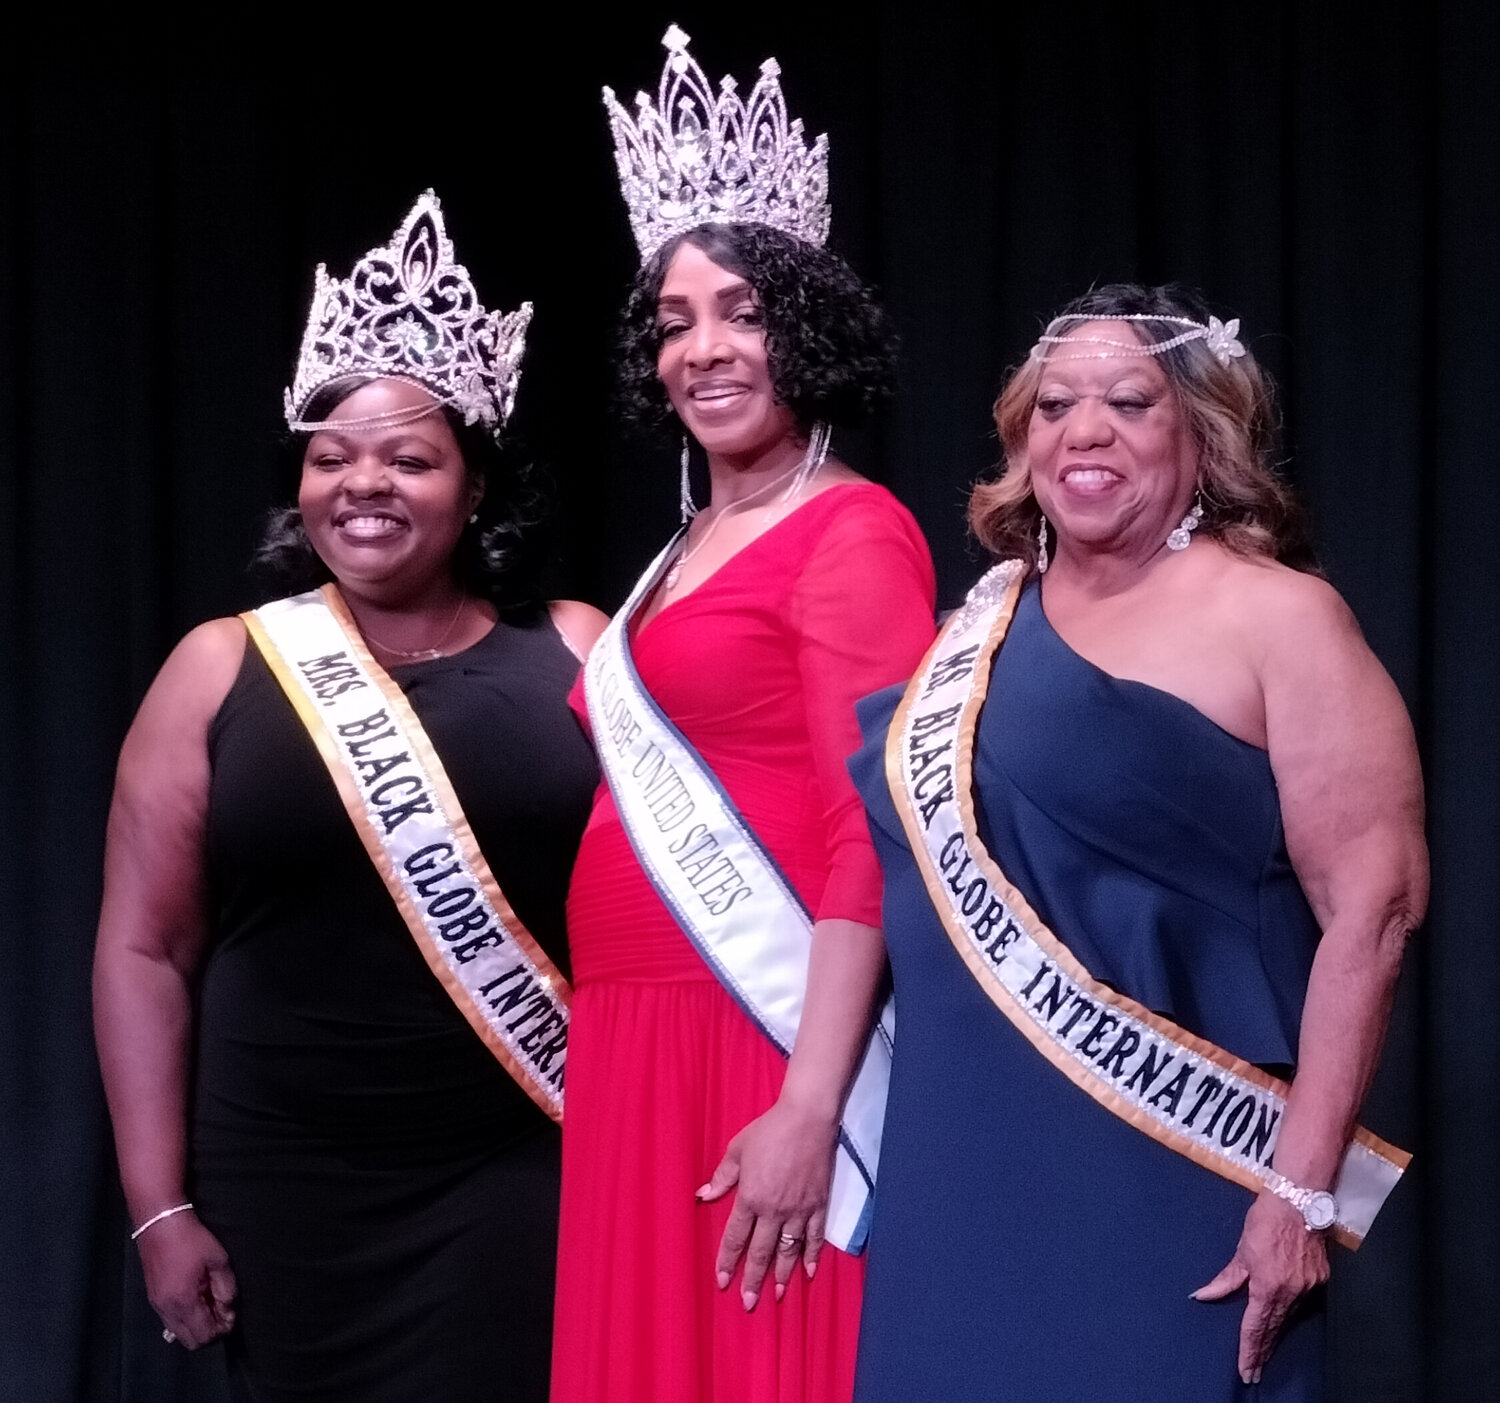 Ms. Black Globe International Queen Lorraine Taylor shown in blue dress with other queens.